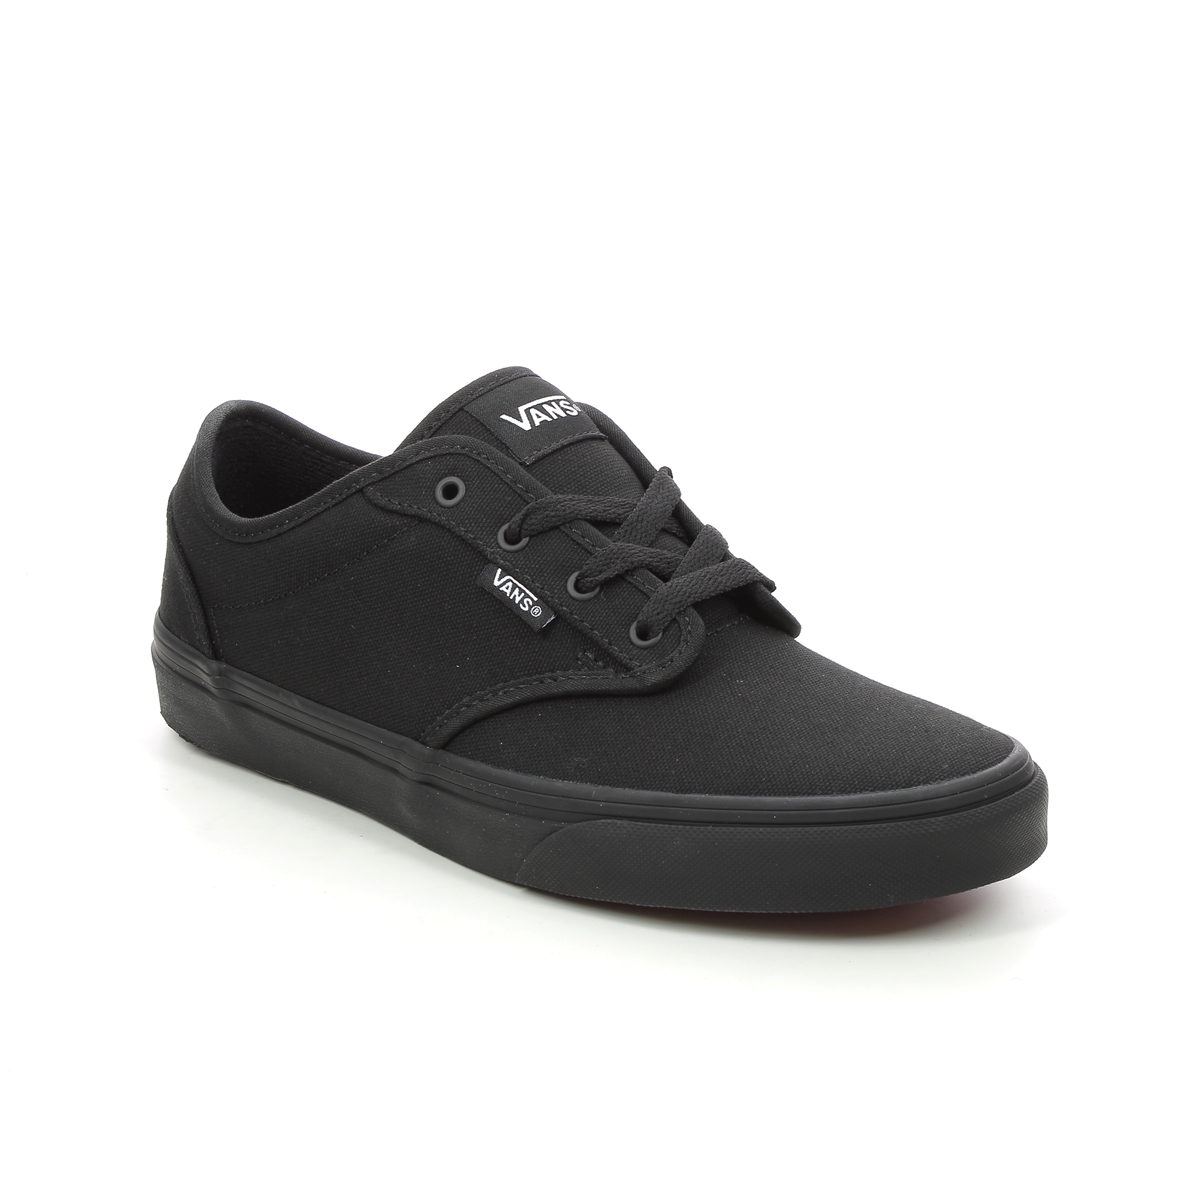 Vans Atwood Youth Black Kids Trainers  Vki5186 In Size 4 In Plain Black Vans Boys Trainers For School For kids